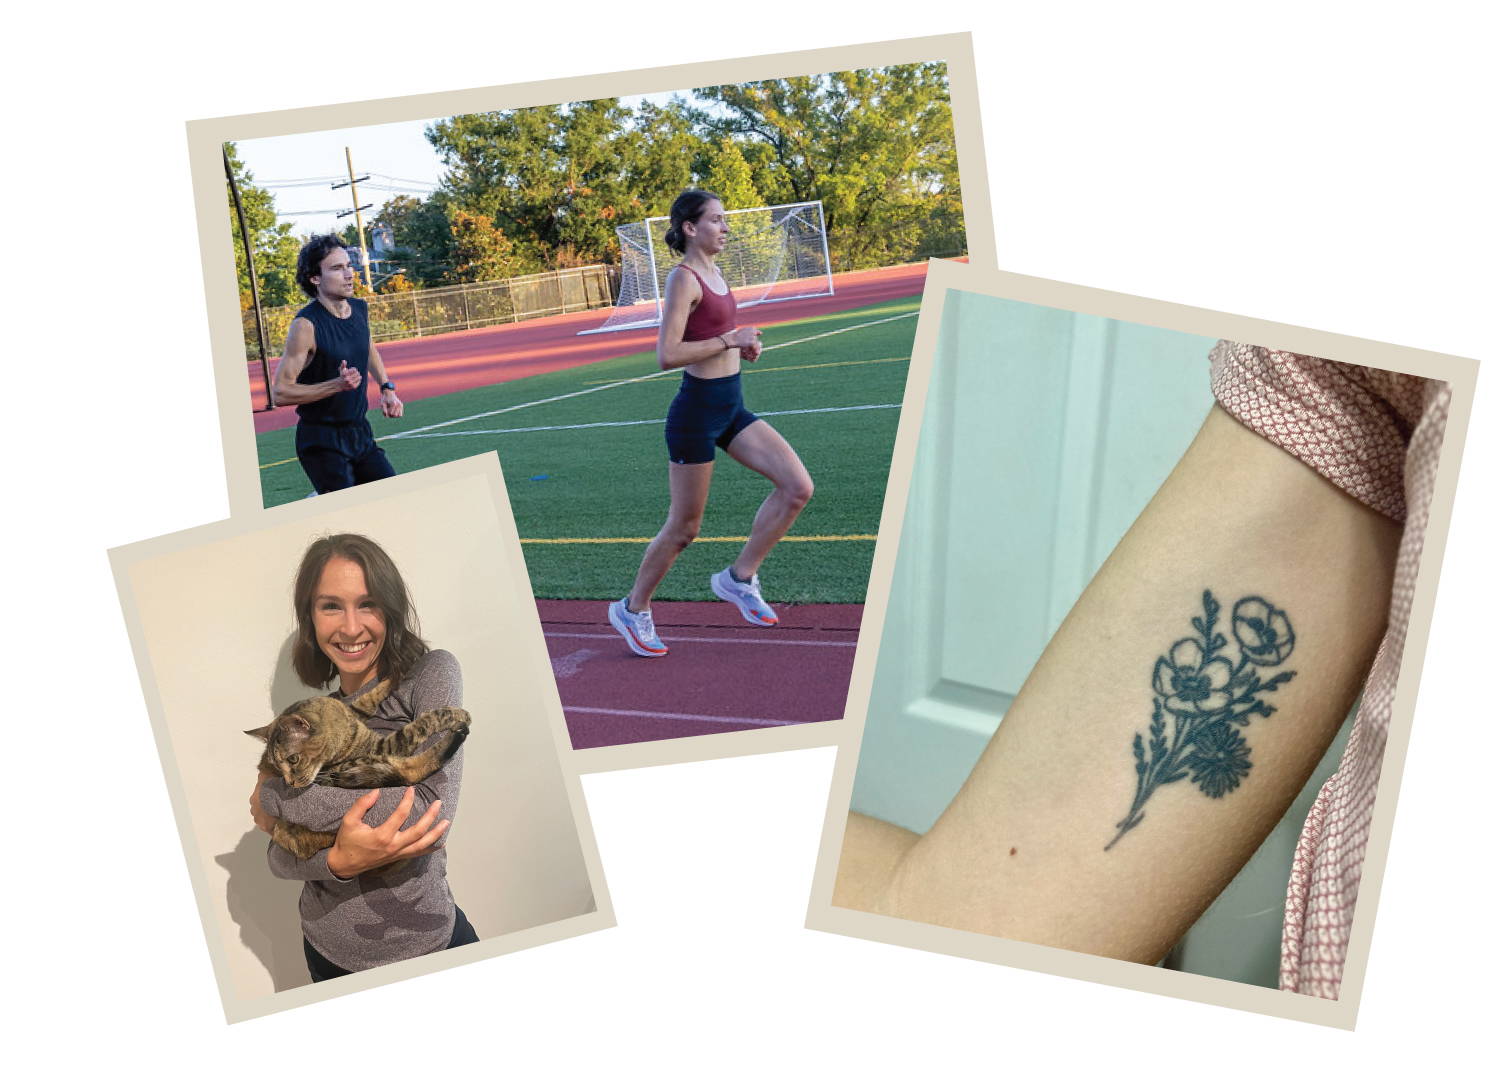 Left: Elena Hayday smiling and holding her cat. Middle: Elena at practice, running on a track with a teammate. Right: Elena's wildflower tattoo on her bicep.